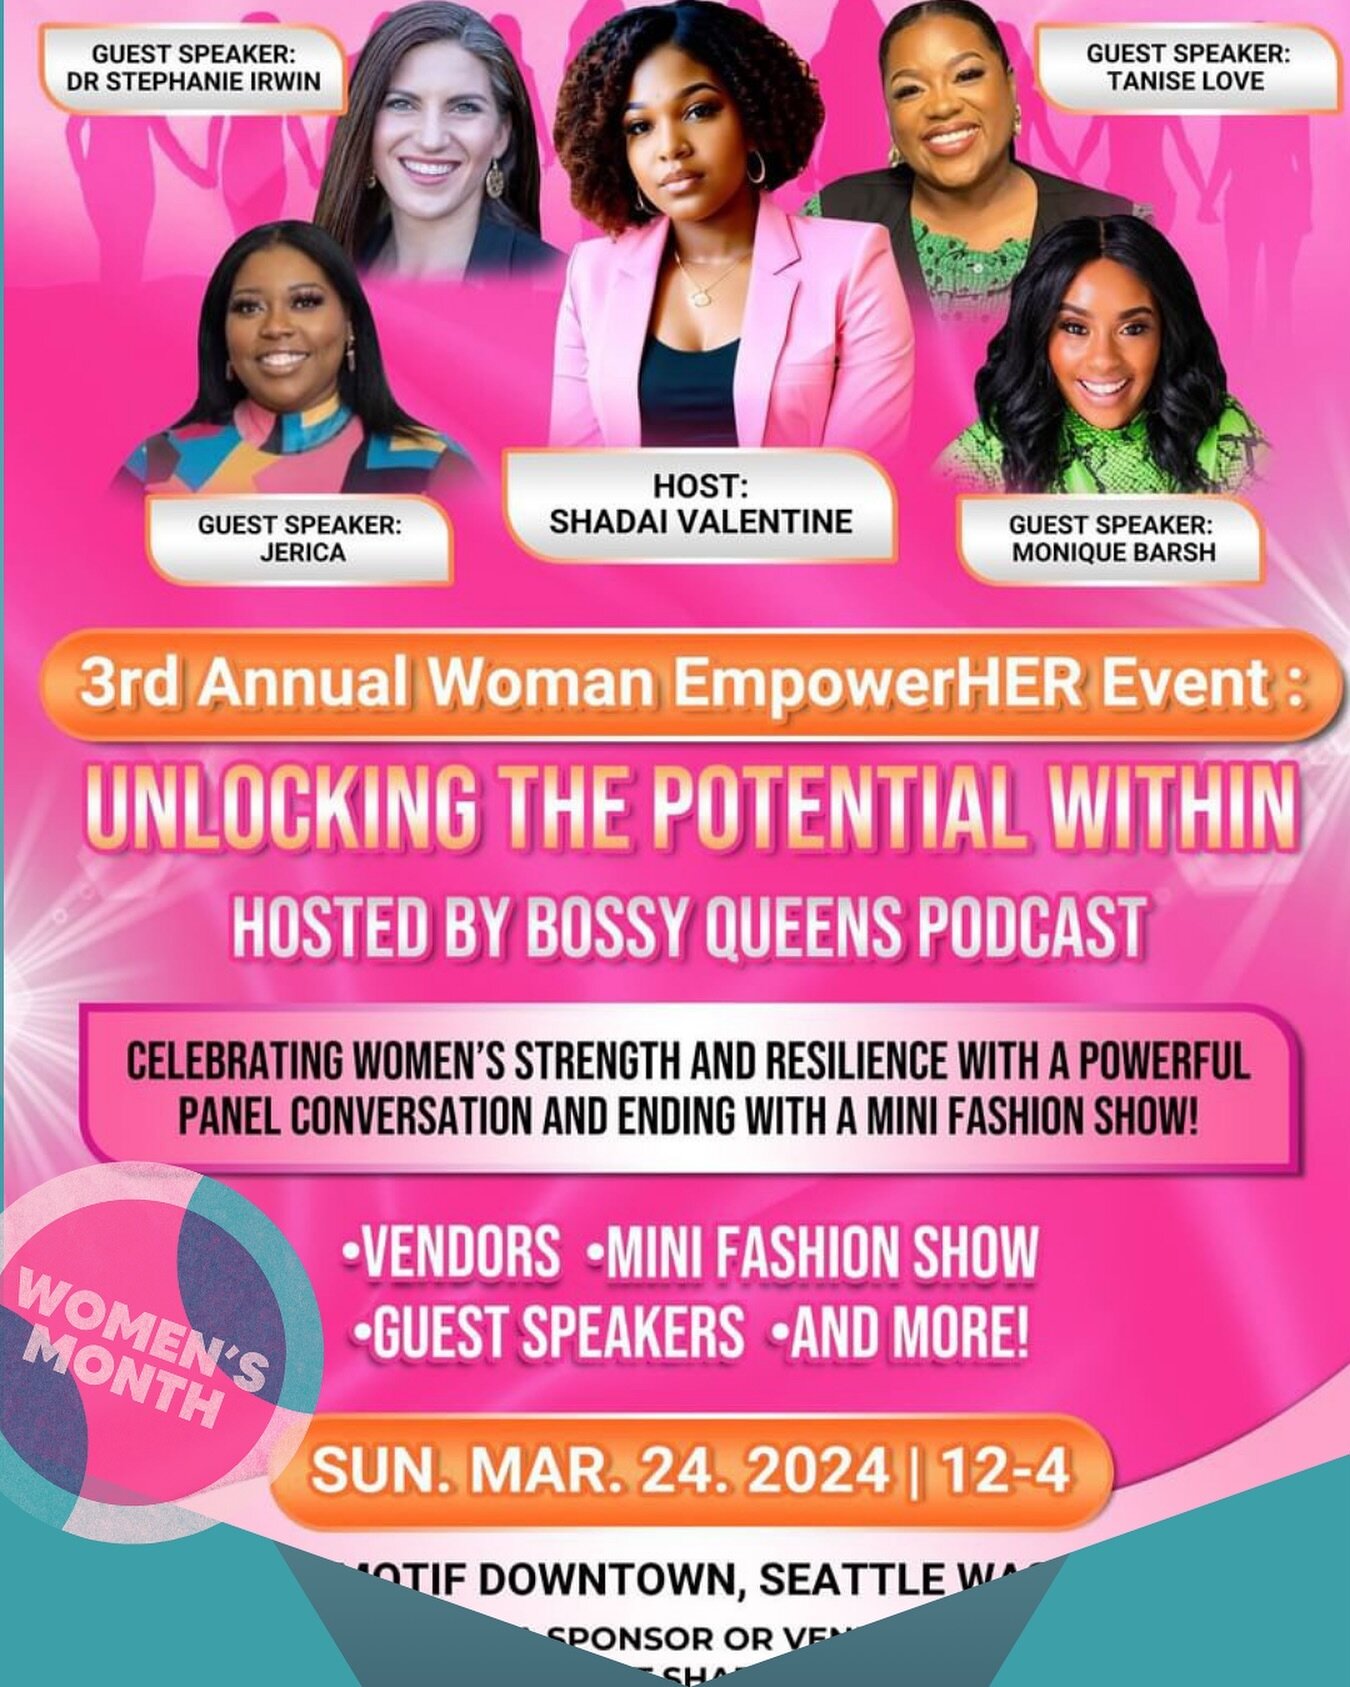 Happy Women&rsquo;s Month Seattle! 

As we focus on elevating, investing in, and celebrating all women, including the generations who have made global change and literally populated this earth, let&rsquo;s come together to uplift one another and make